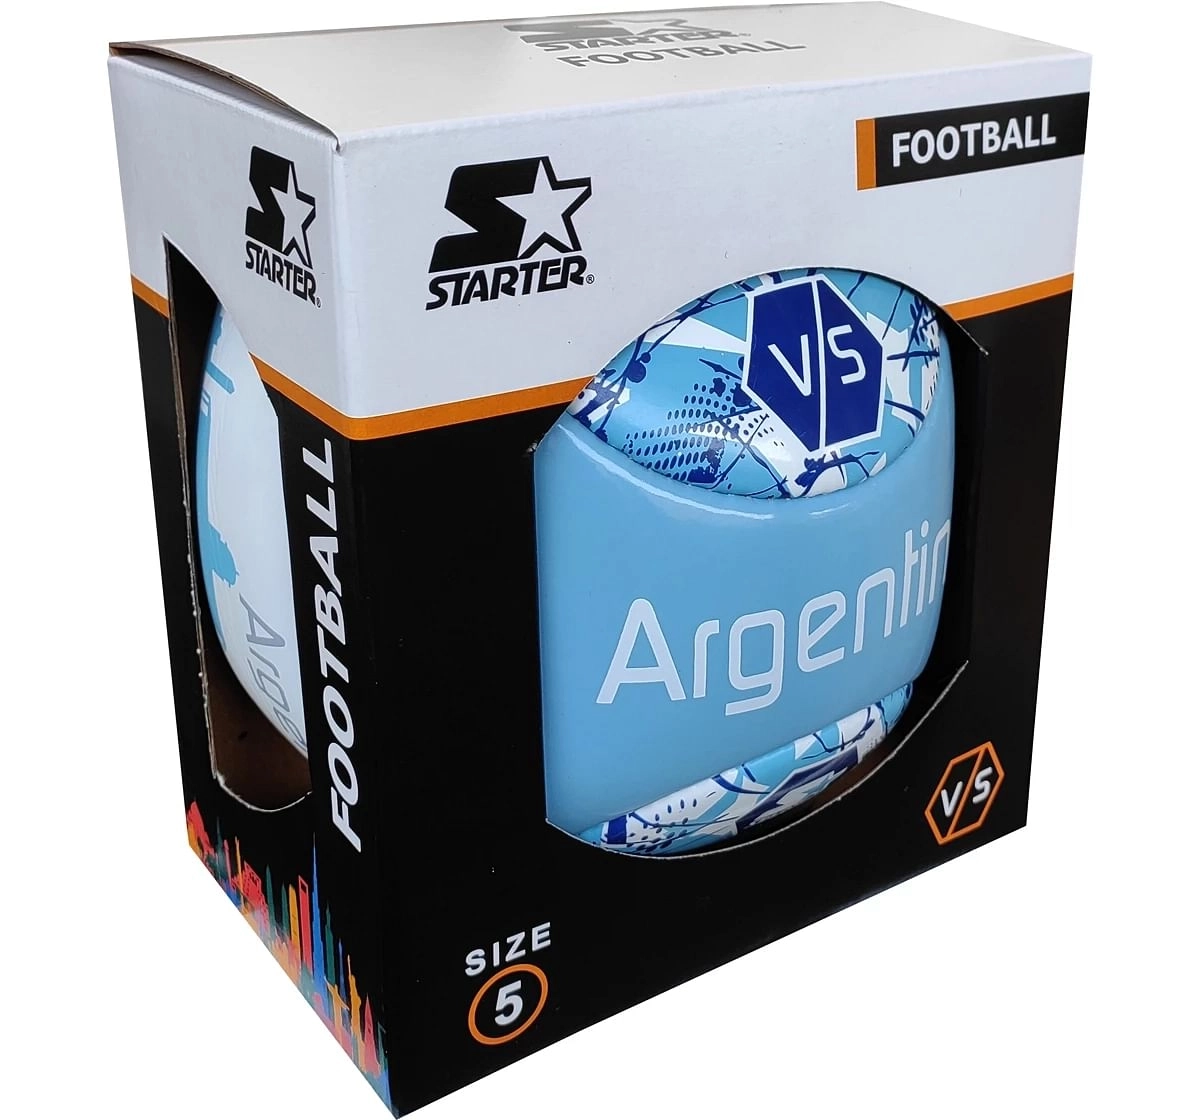 Country Football Starter L3 Size 5 - Argentina